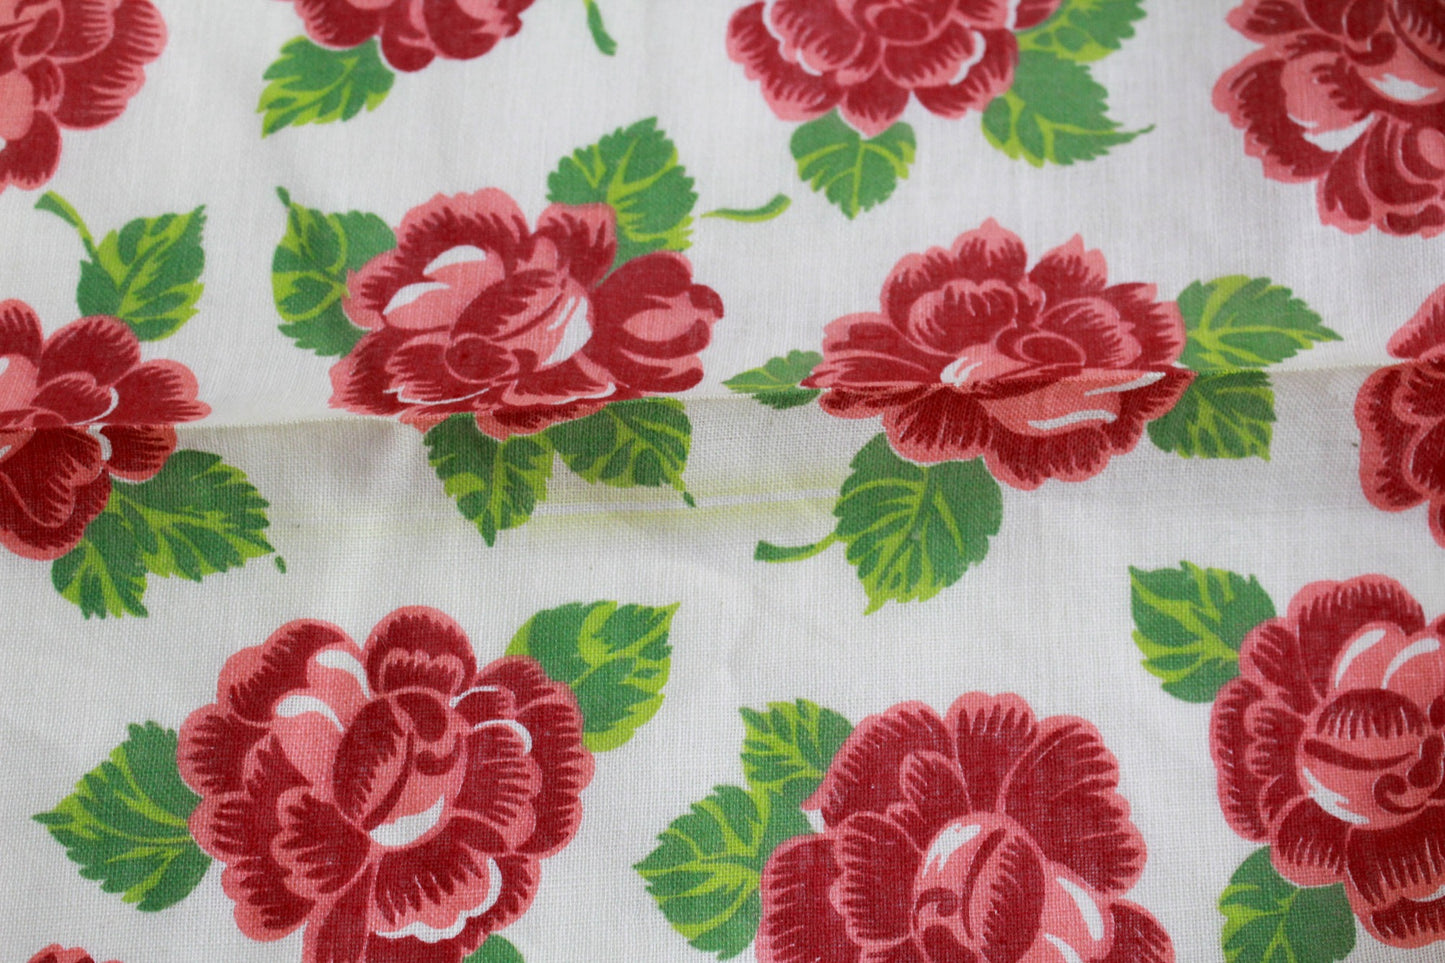 1940s/50s Rose Floral Printed Cotton Fabric, 5 Yards, Vintage Rose Printed Sewing Fabric